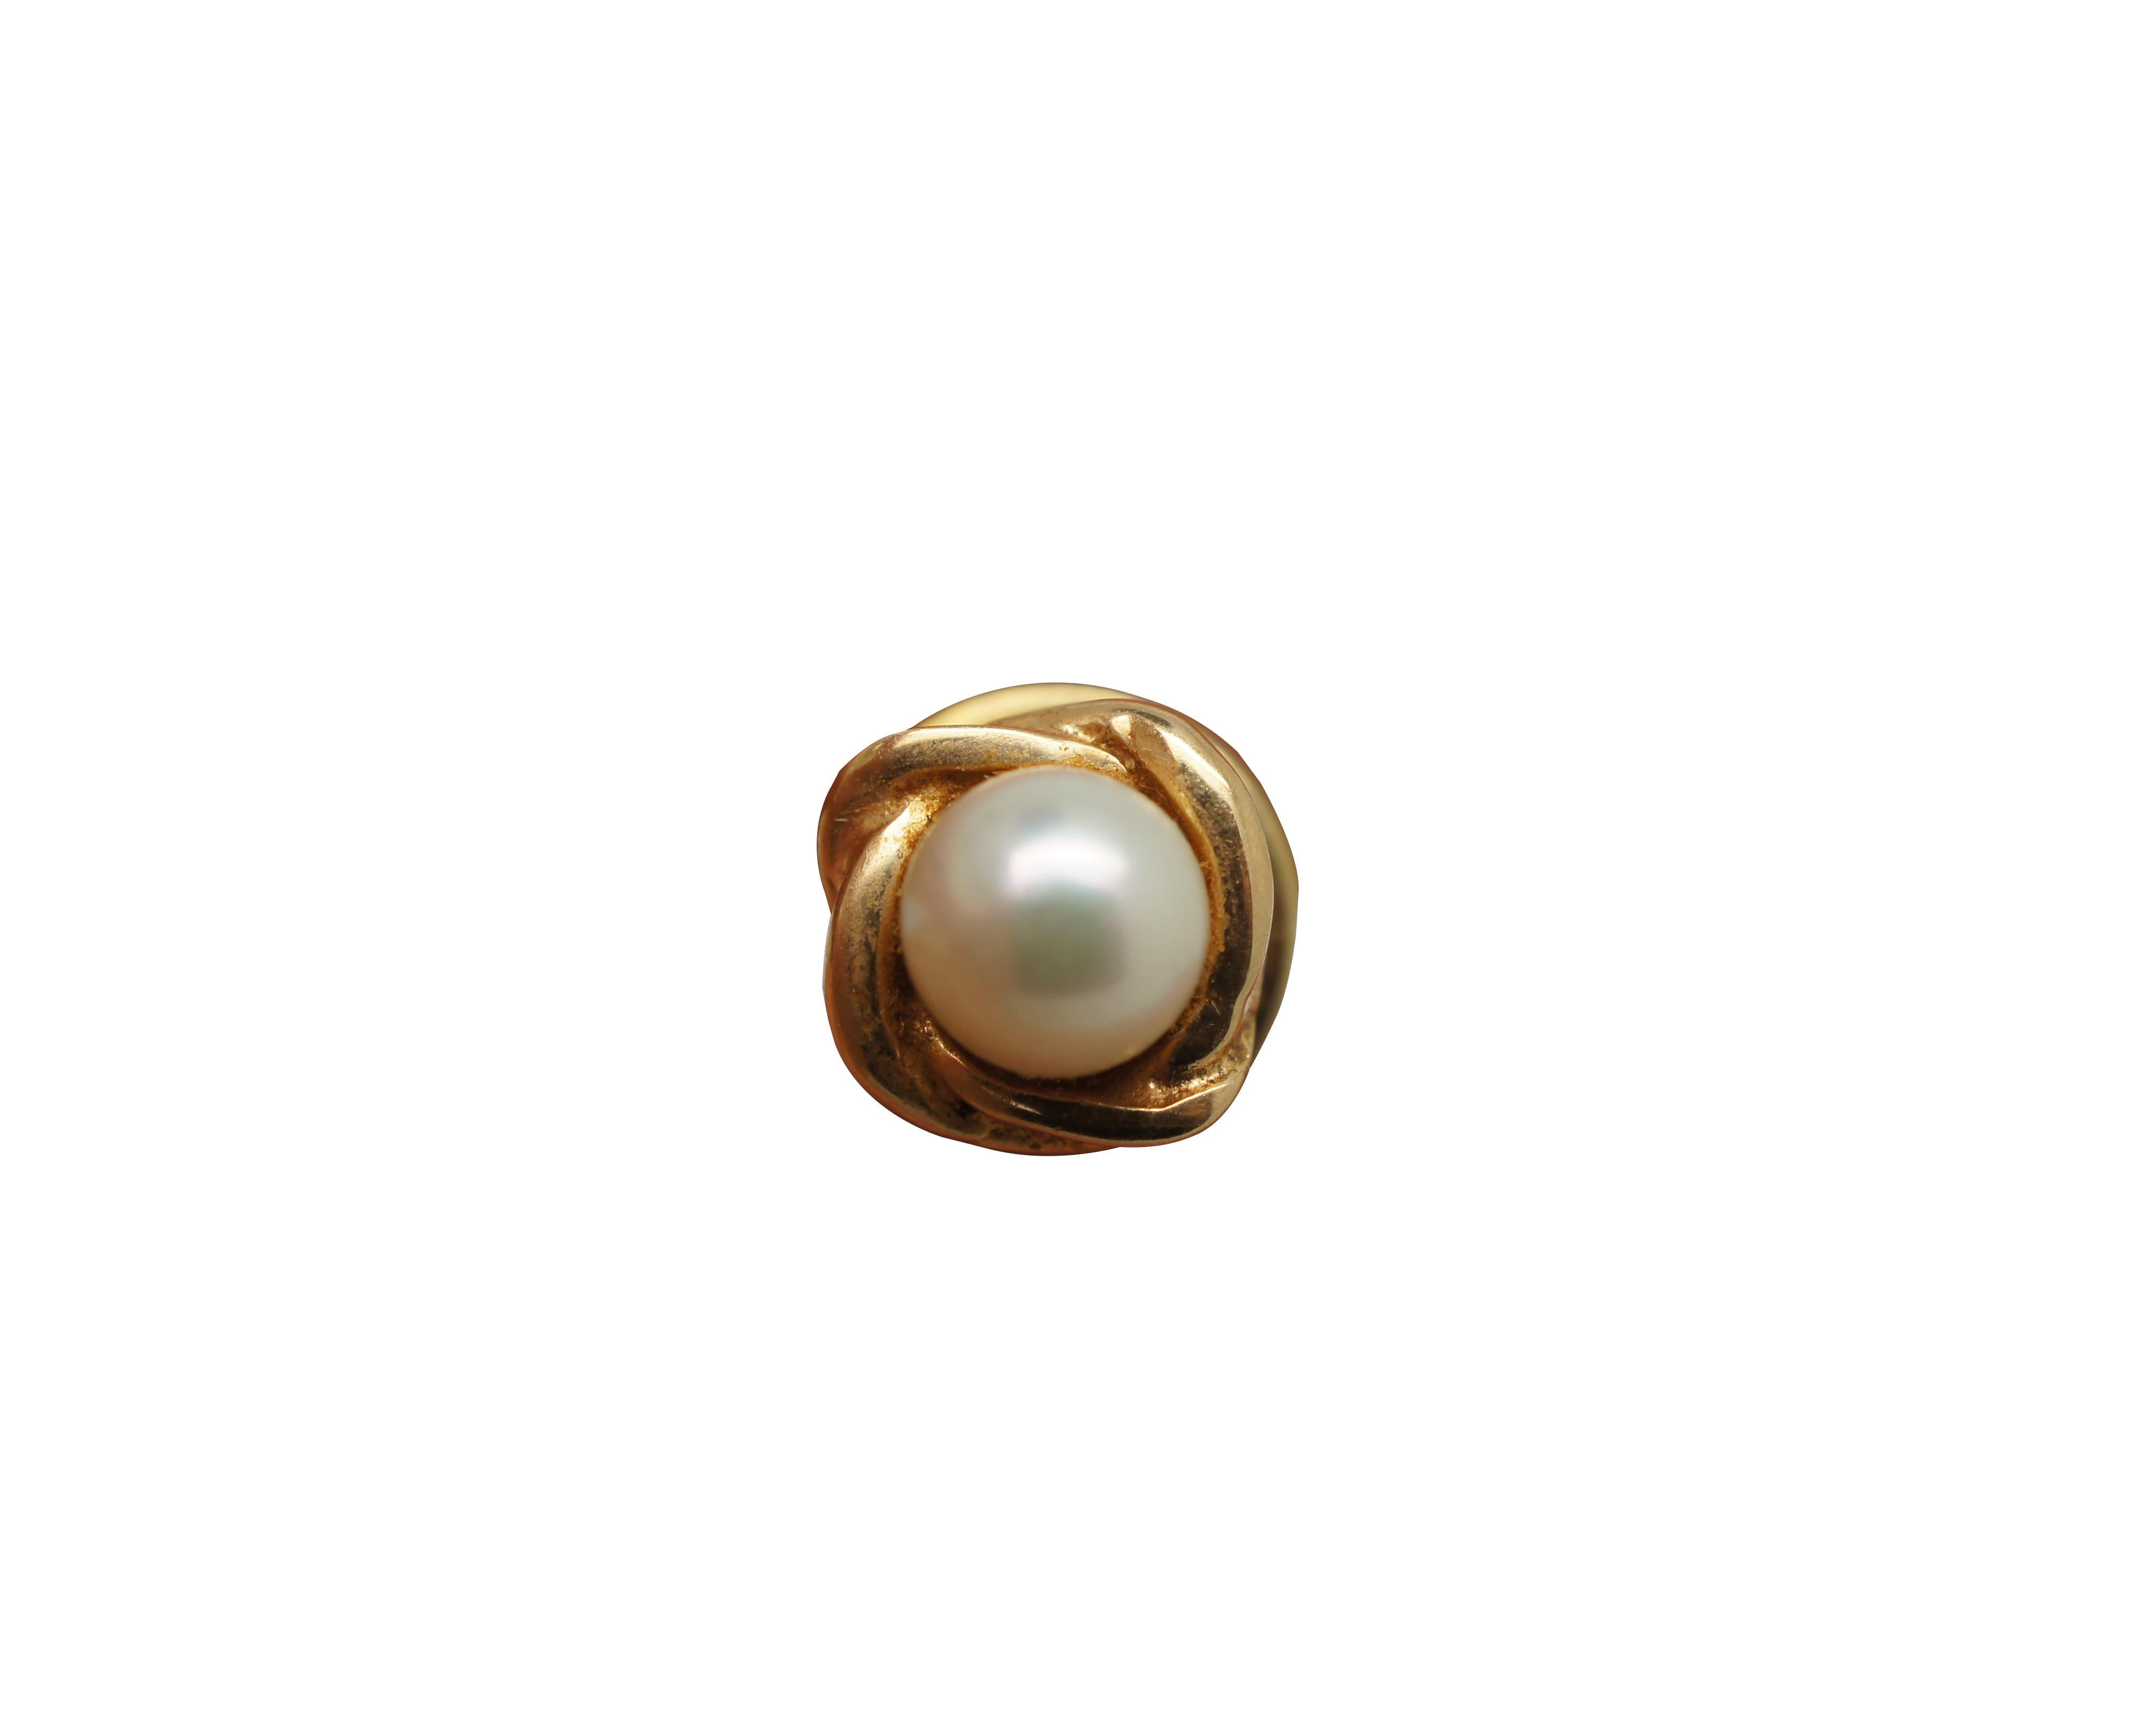 Vintge 14K Yellow Gold Pearl Rope Twist Tie Tack Lapel Pin Brooch 3.2g In Good Condition For Sale In Dayton, OH